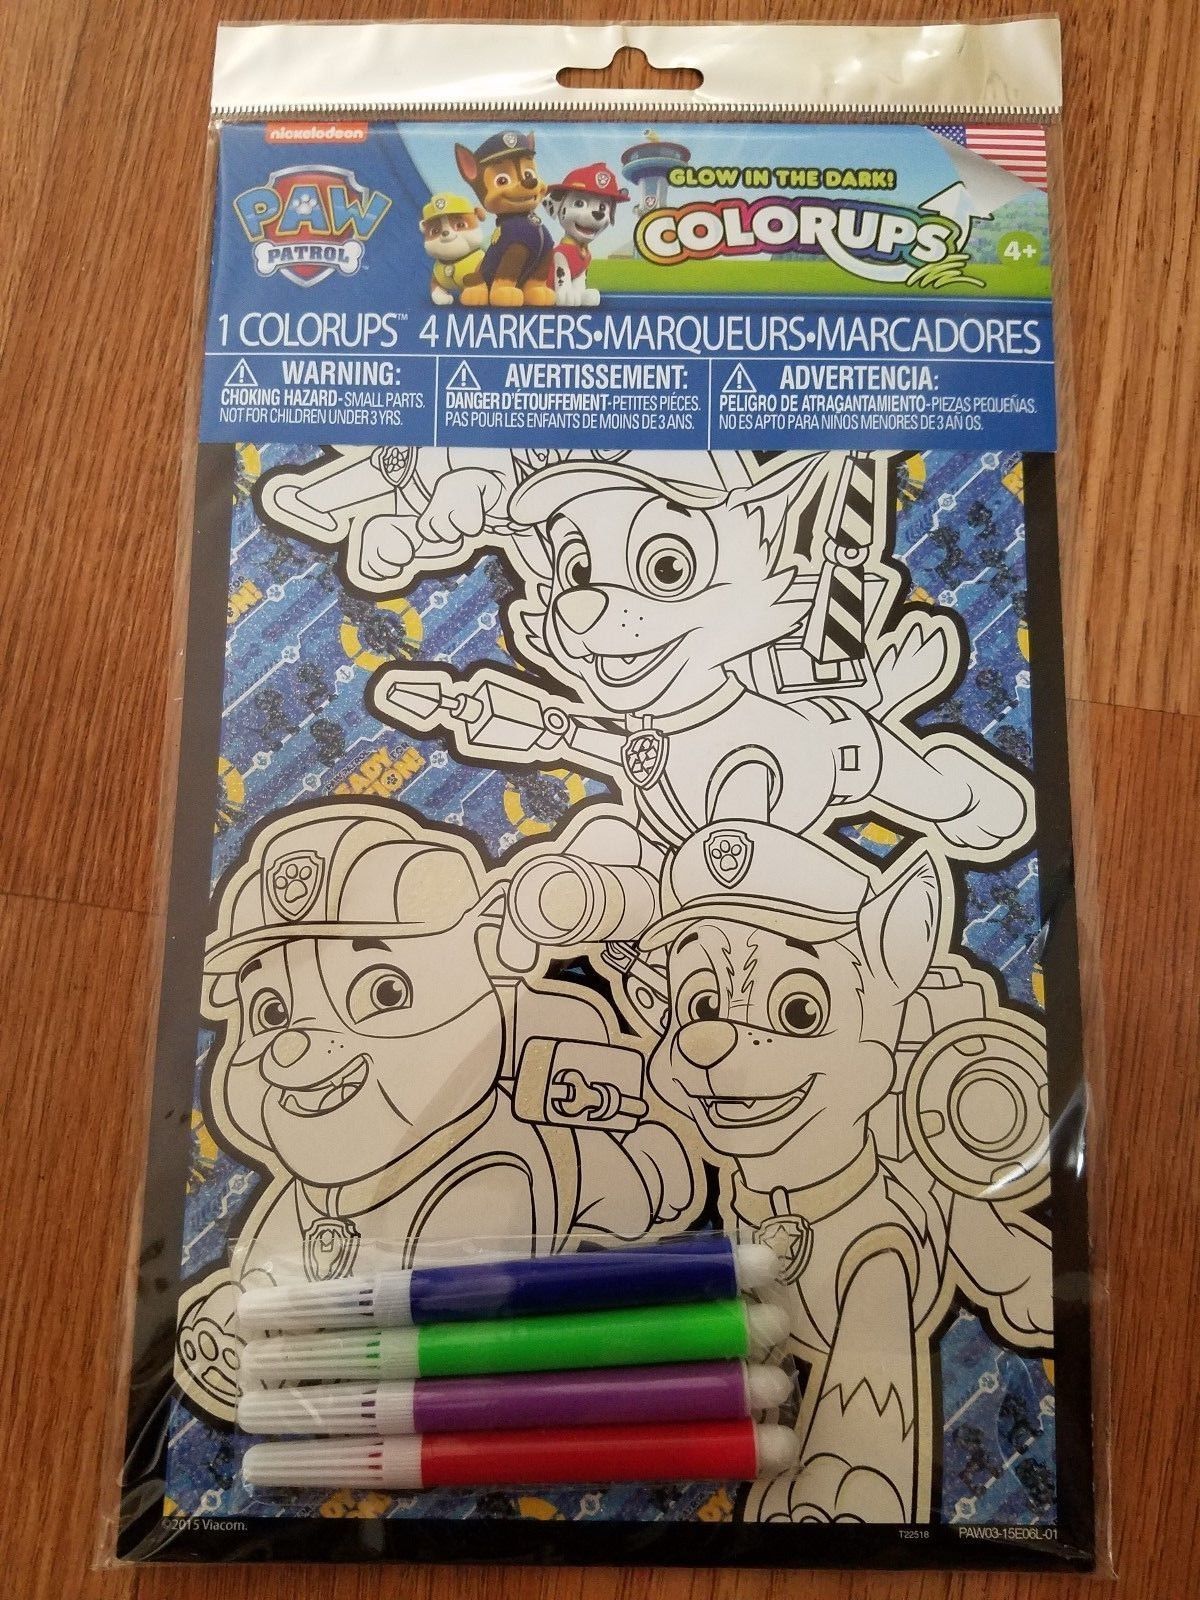 Primary image for Paw Patrol Colorups Glow In The Dark